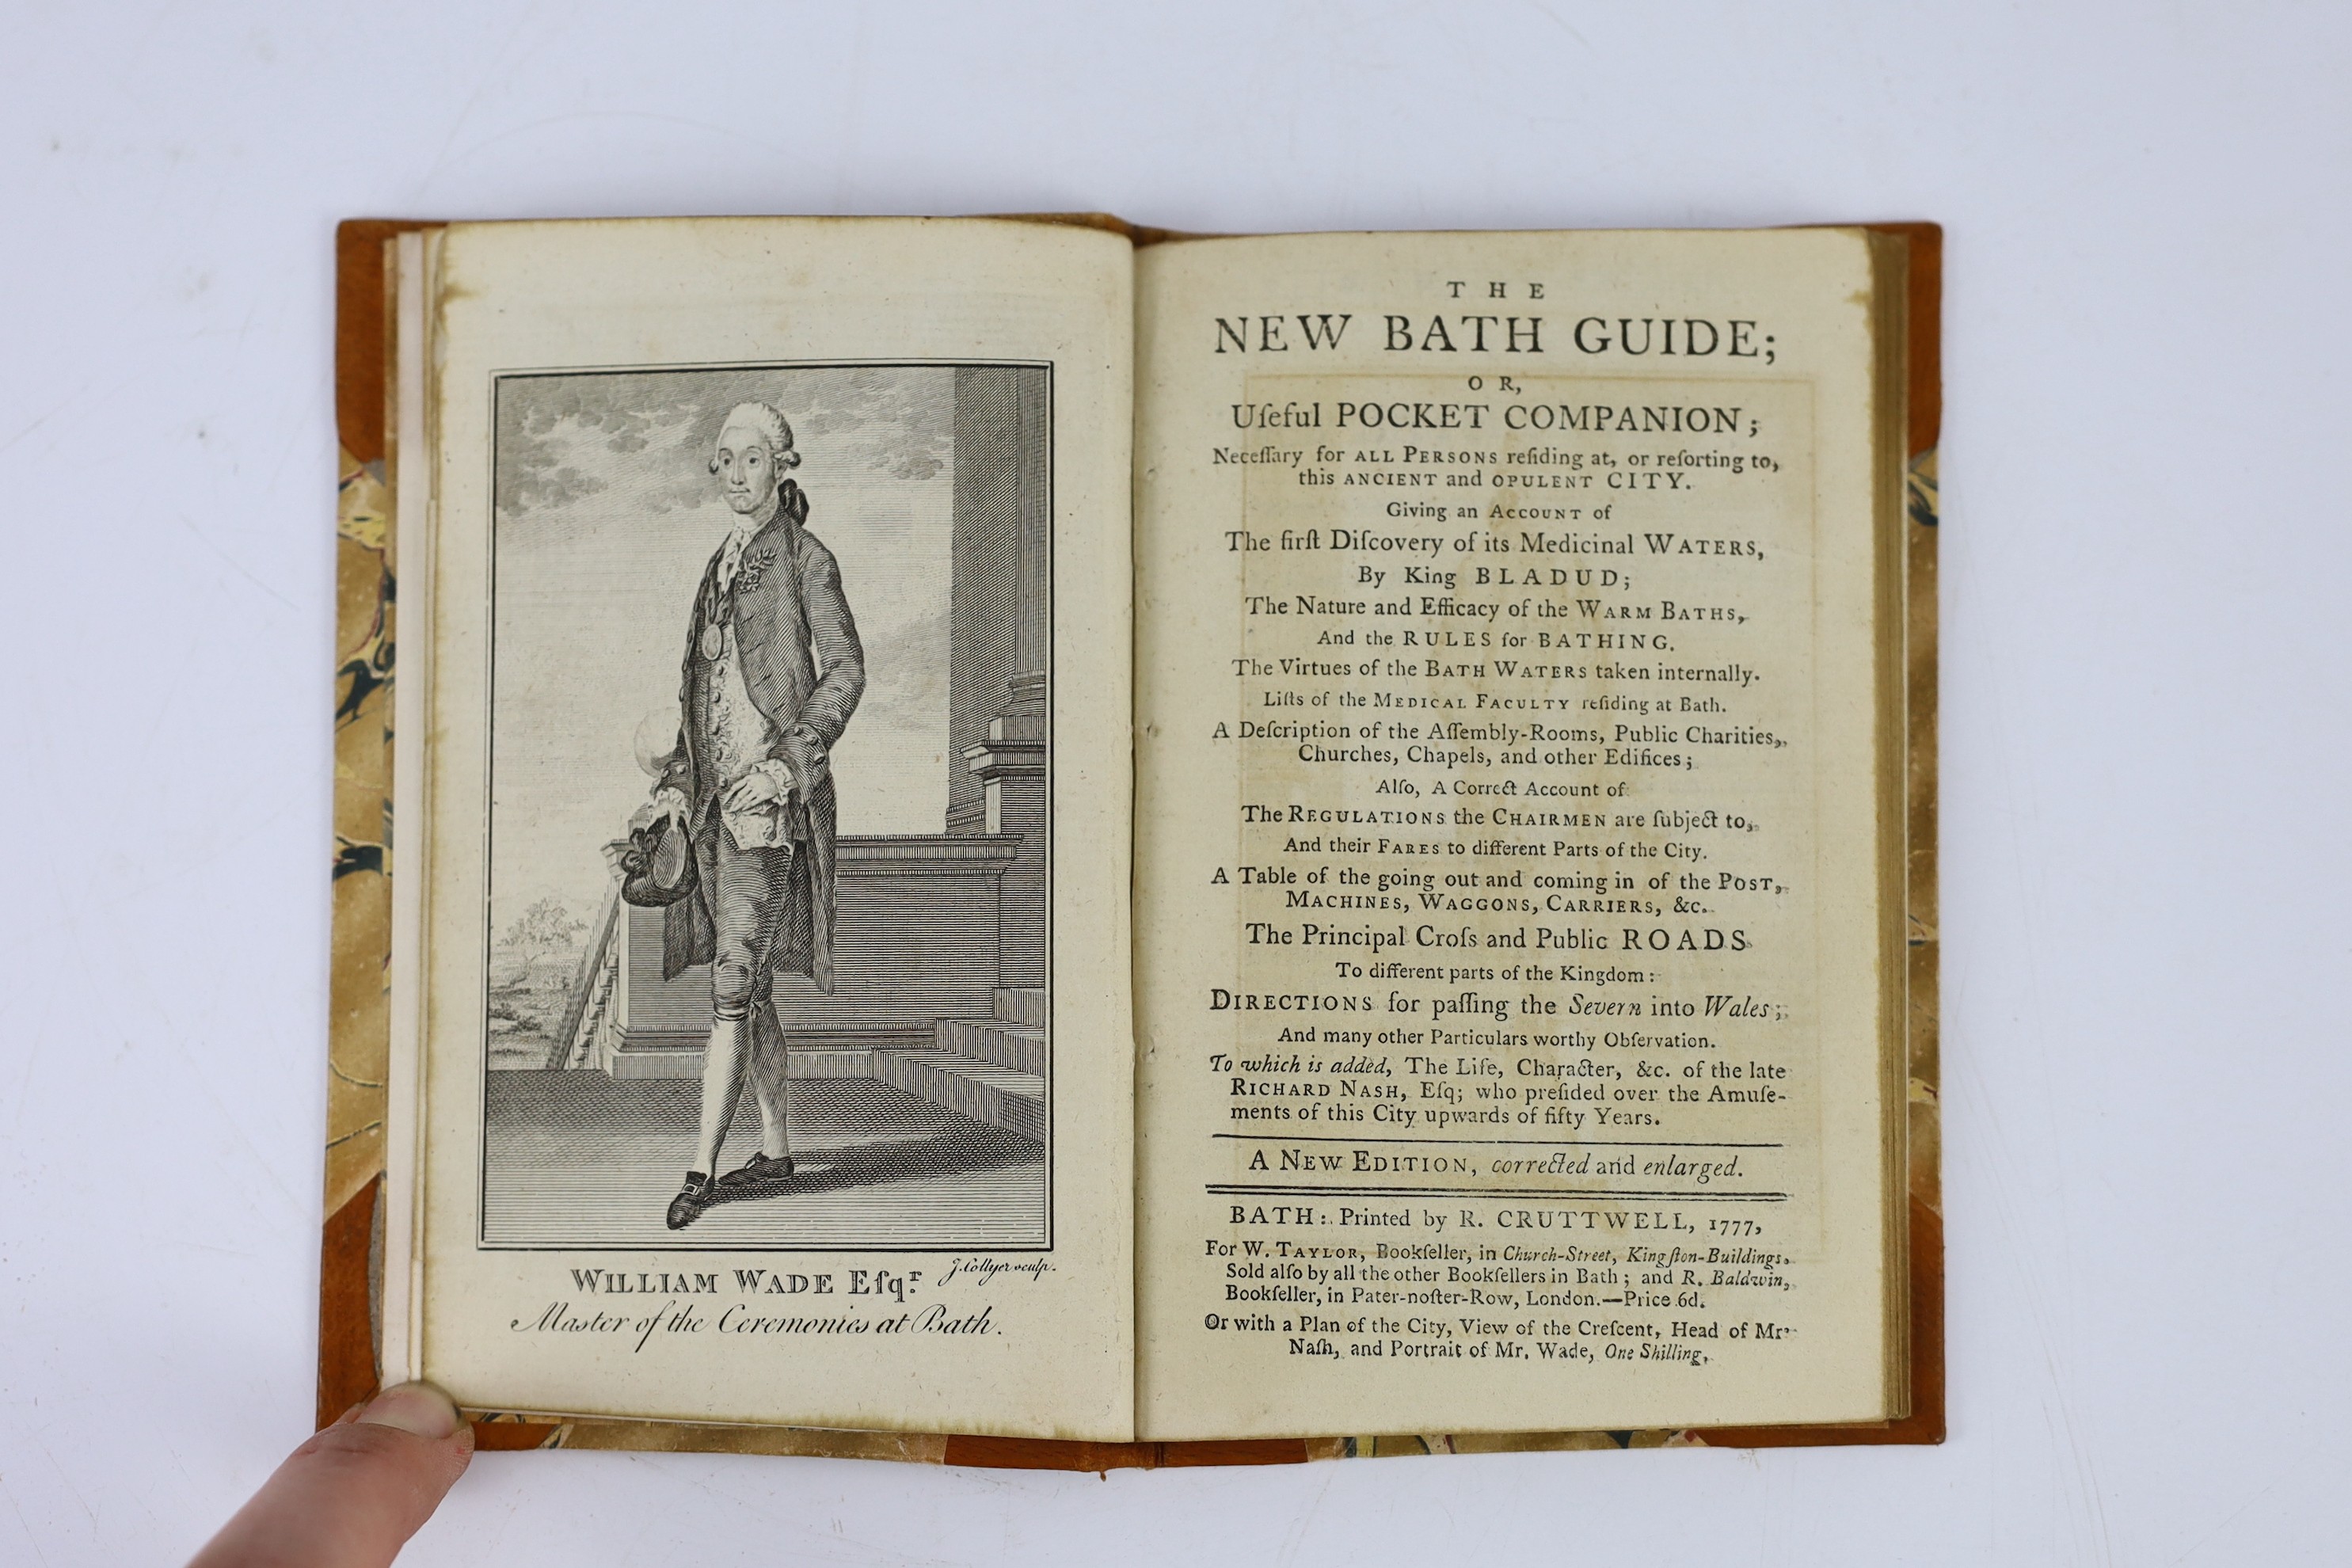 SOMERSET, BATH: The Historical and Local New Bath Guide...with Observations on the Medicinal Virtues, and Directions for the Use of the Bath Waters, by Sir George Smith Gibbes.....2 folded plans, 13 plates and 35 decorat